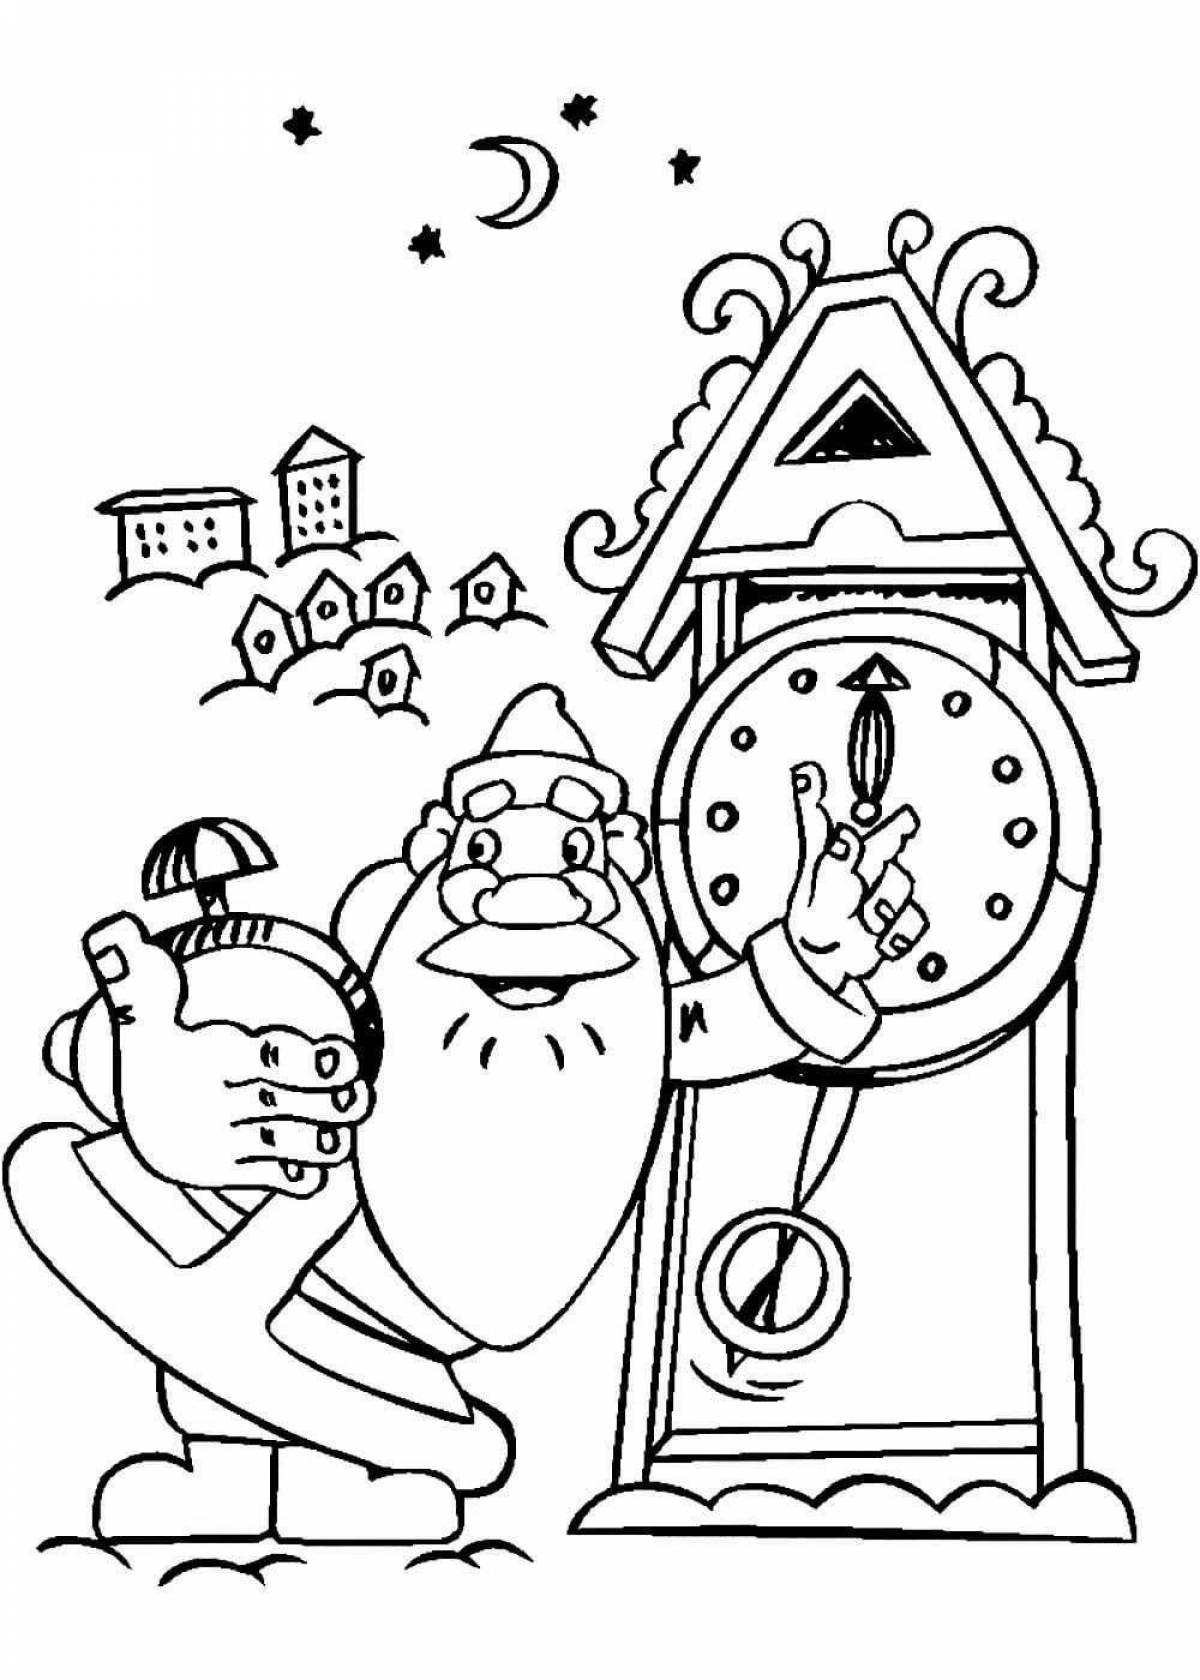 Coloring page of wasted time - unreached